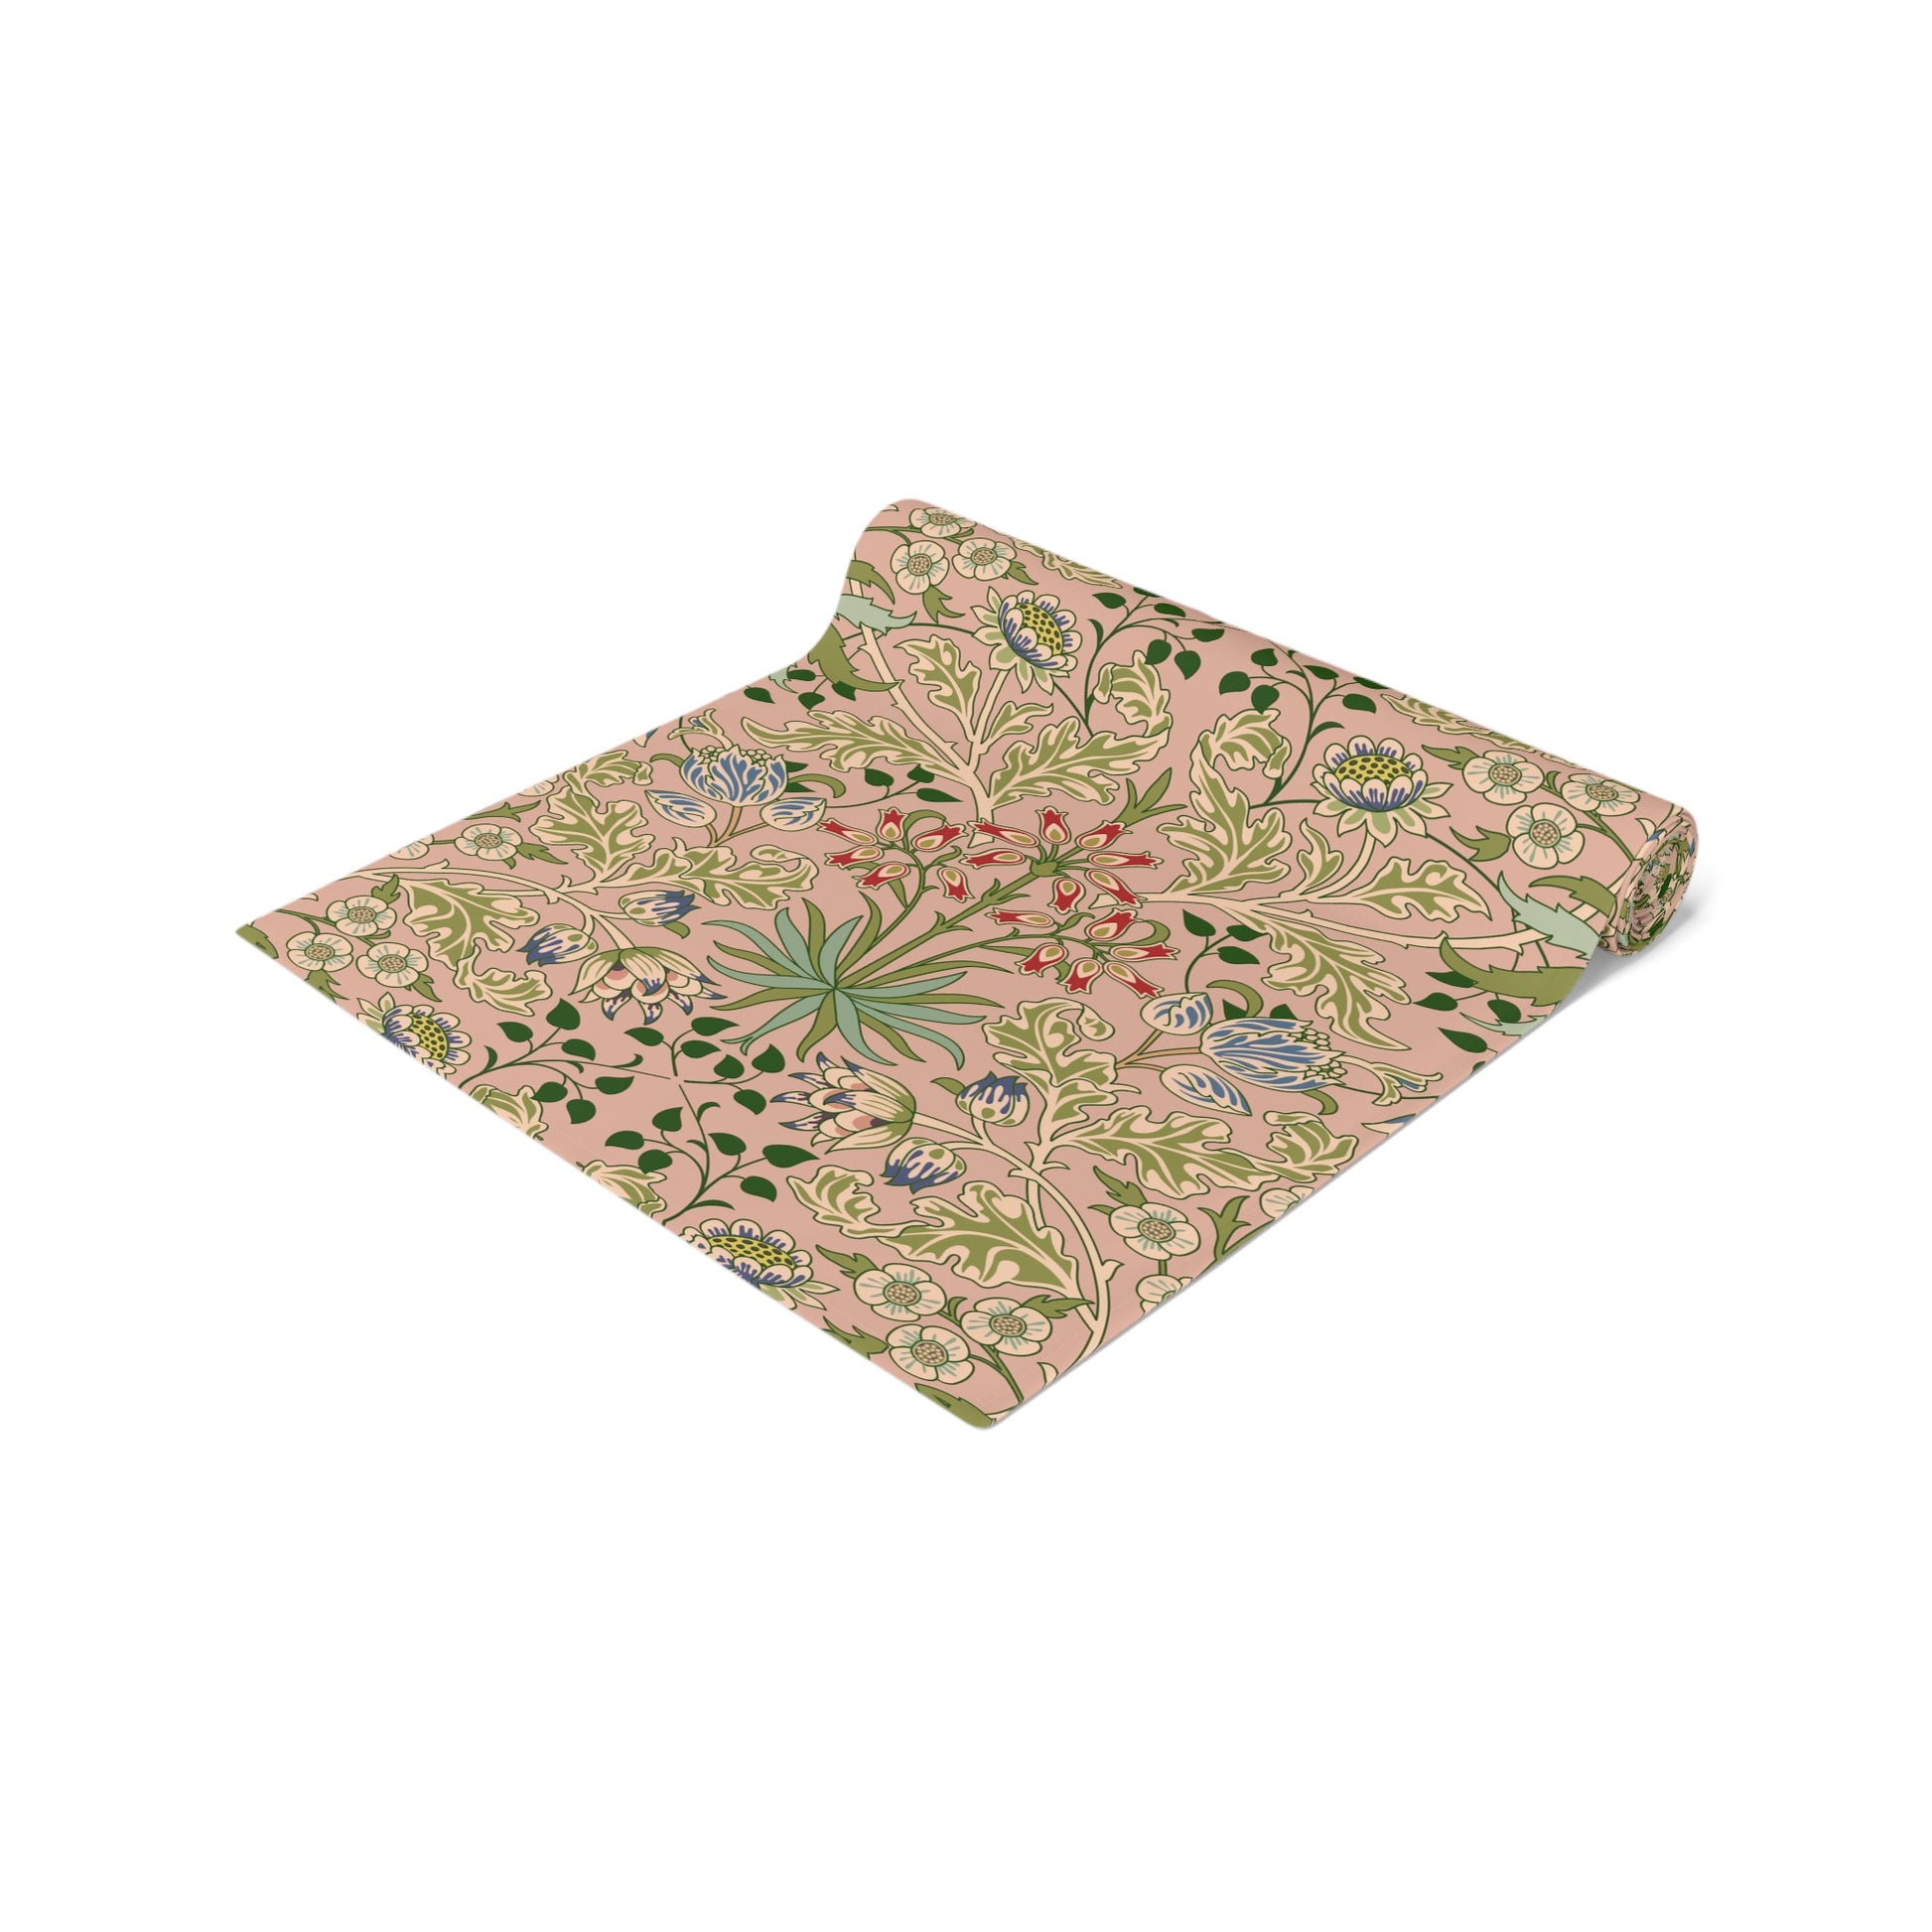 william-morris-co-table-runner-hyacinth-collection-blossom-19